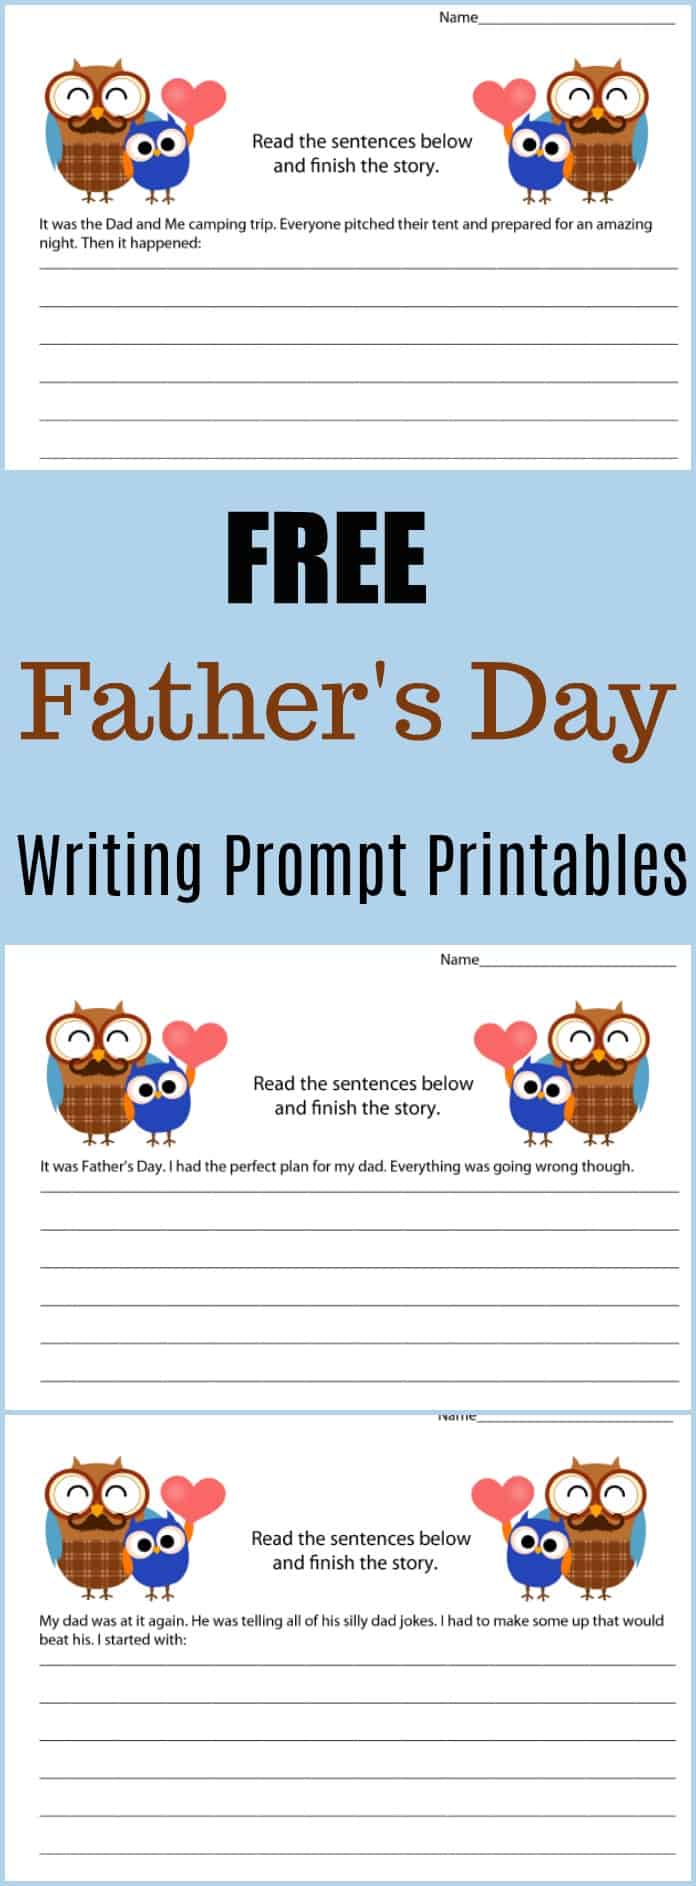 Free Father's Day Writing Prompt Printables - #writing #writingprompt #holiday #printable #freeprintable #education #edchat #homeschool #homeschooling #fathersday 